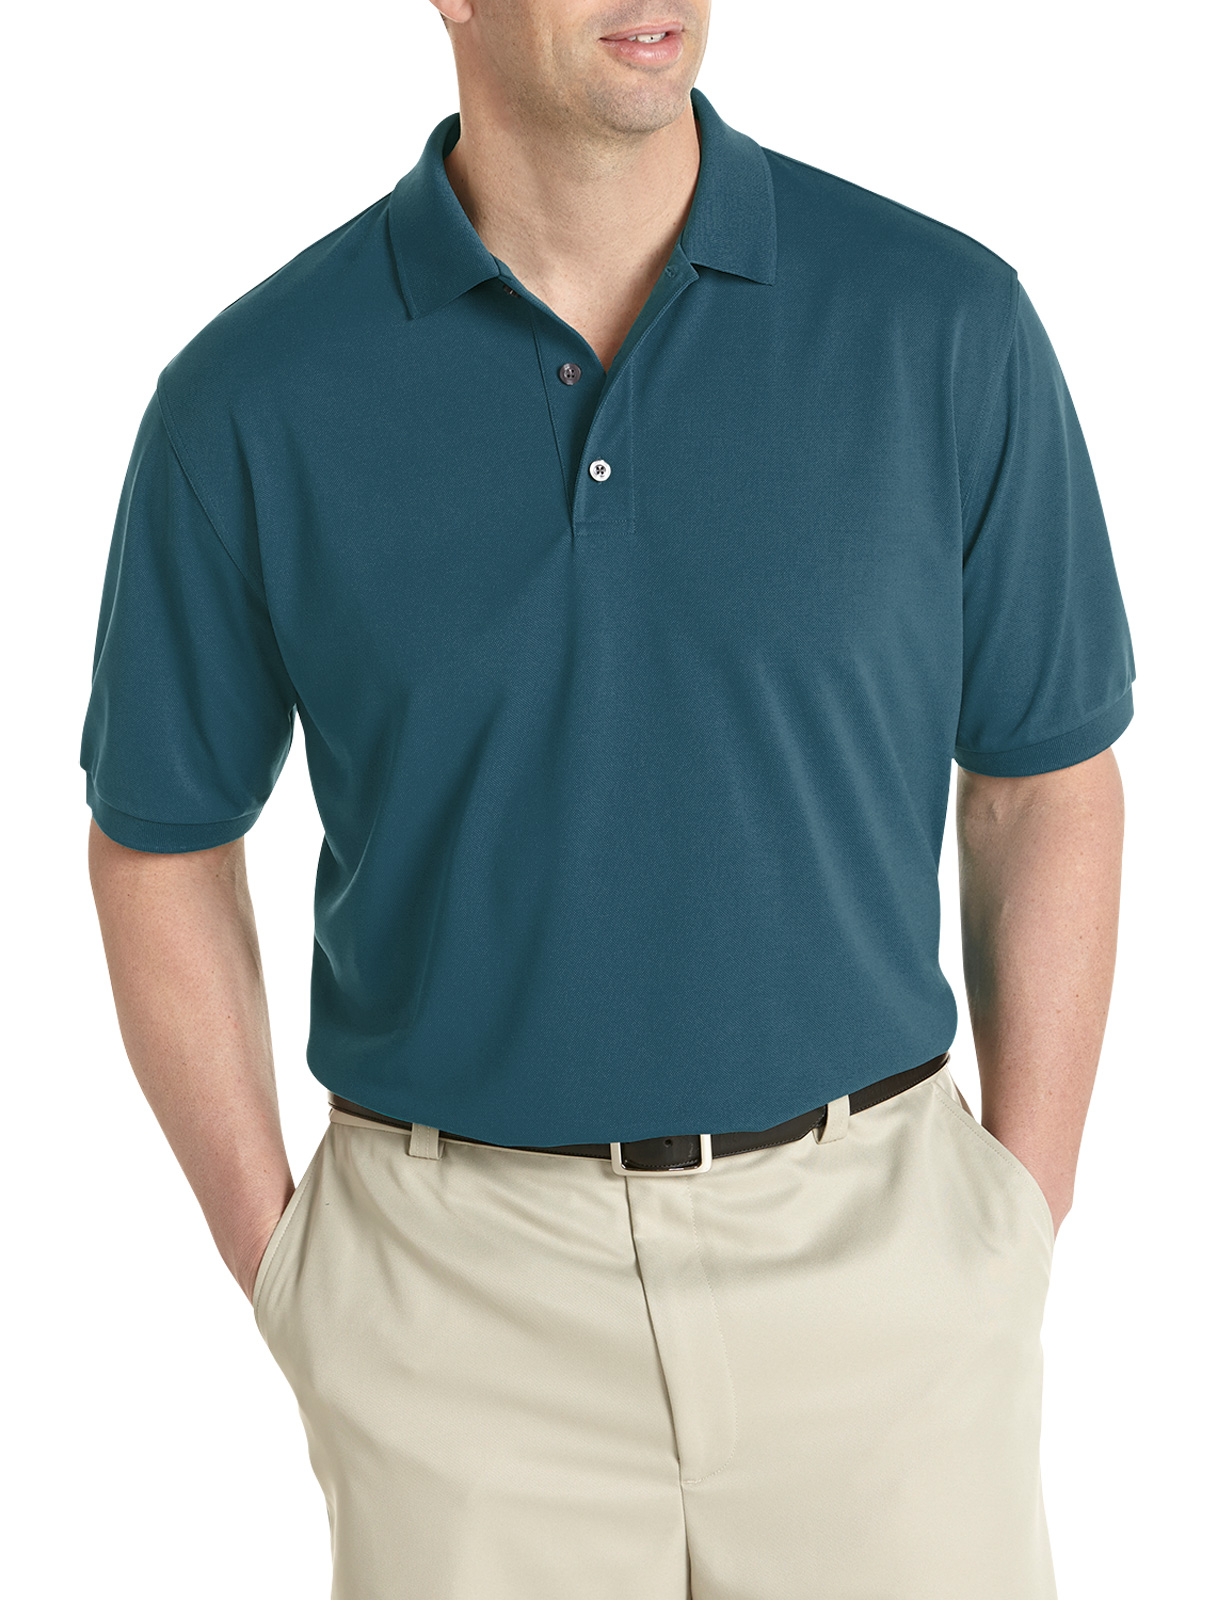 Oak Hill Men's Big and Tall Performance Polo